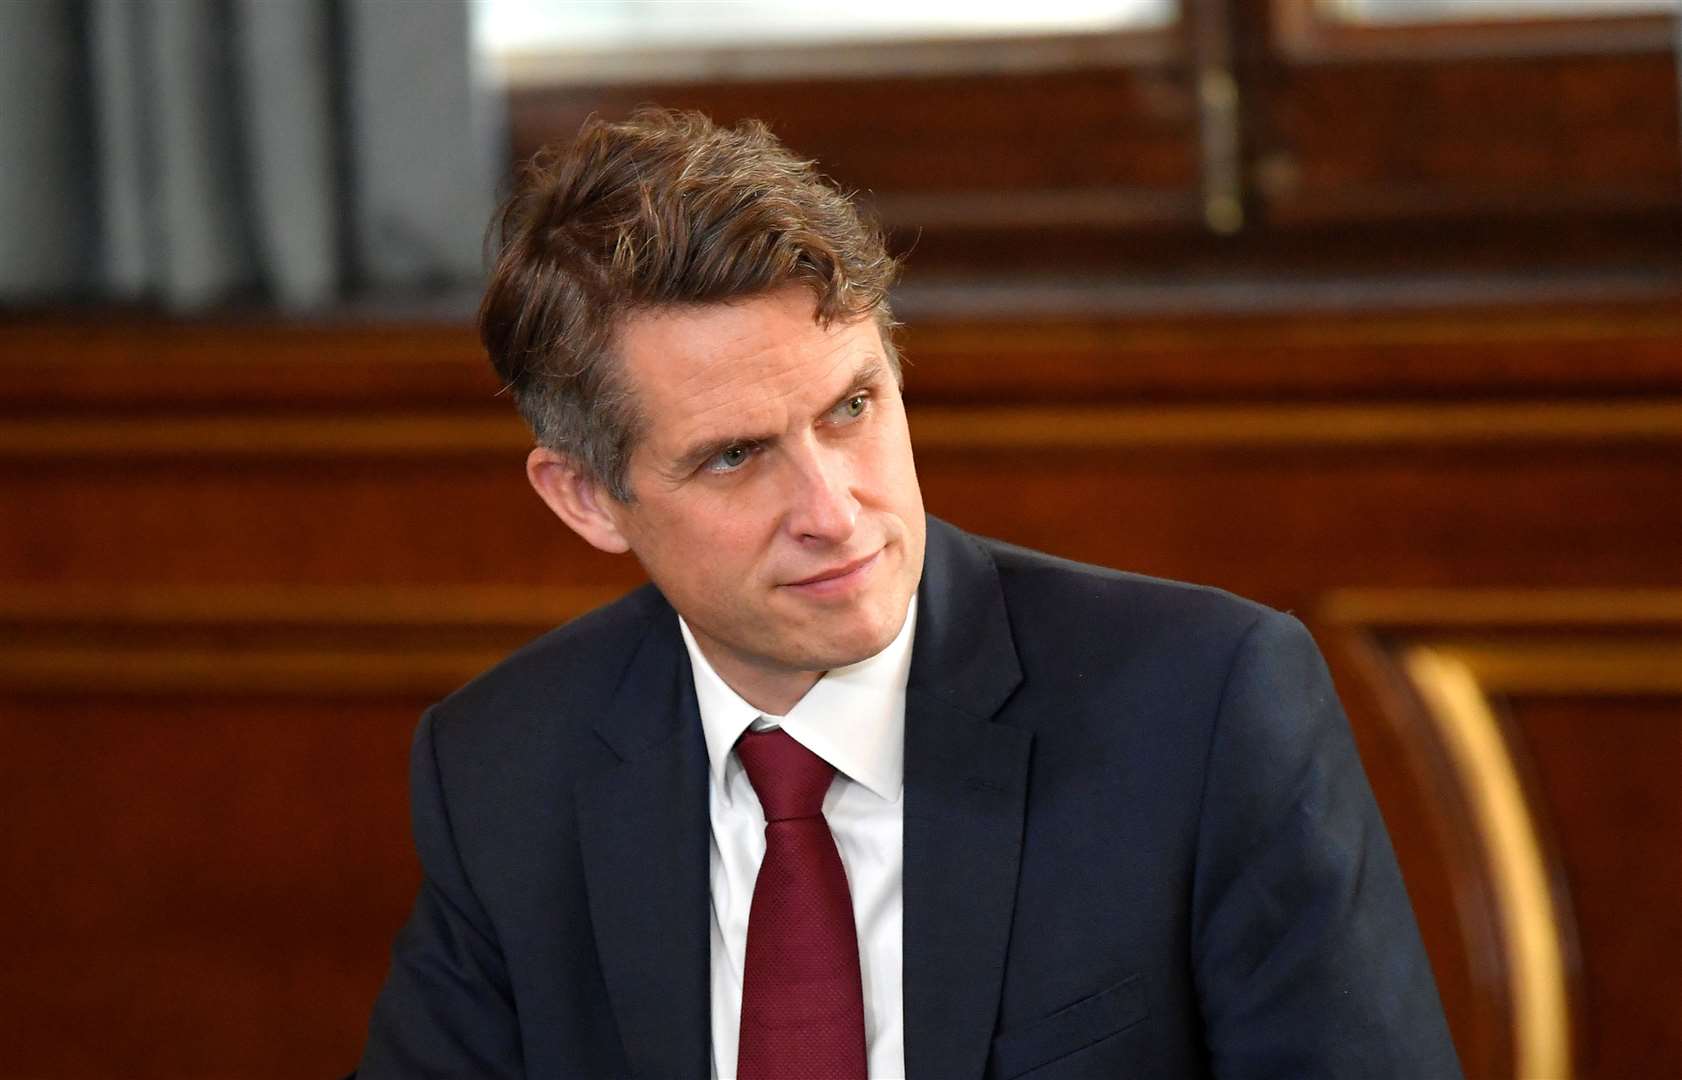 Education Secretary Gavin Williamson said keeping schools and colleges open is a ‘national priority’